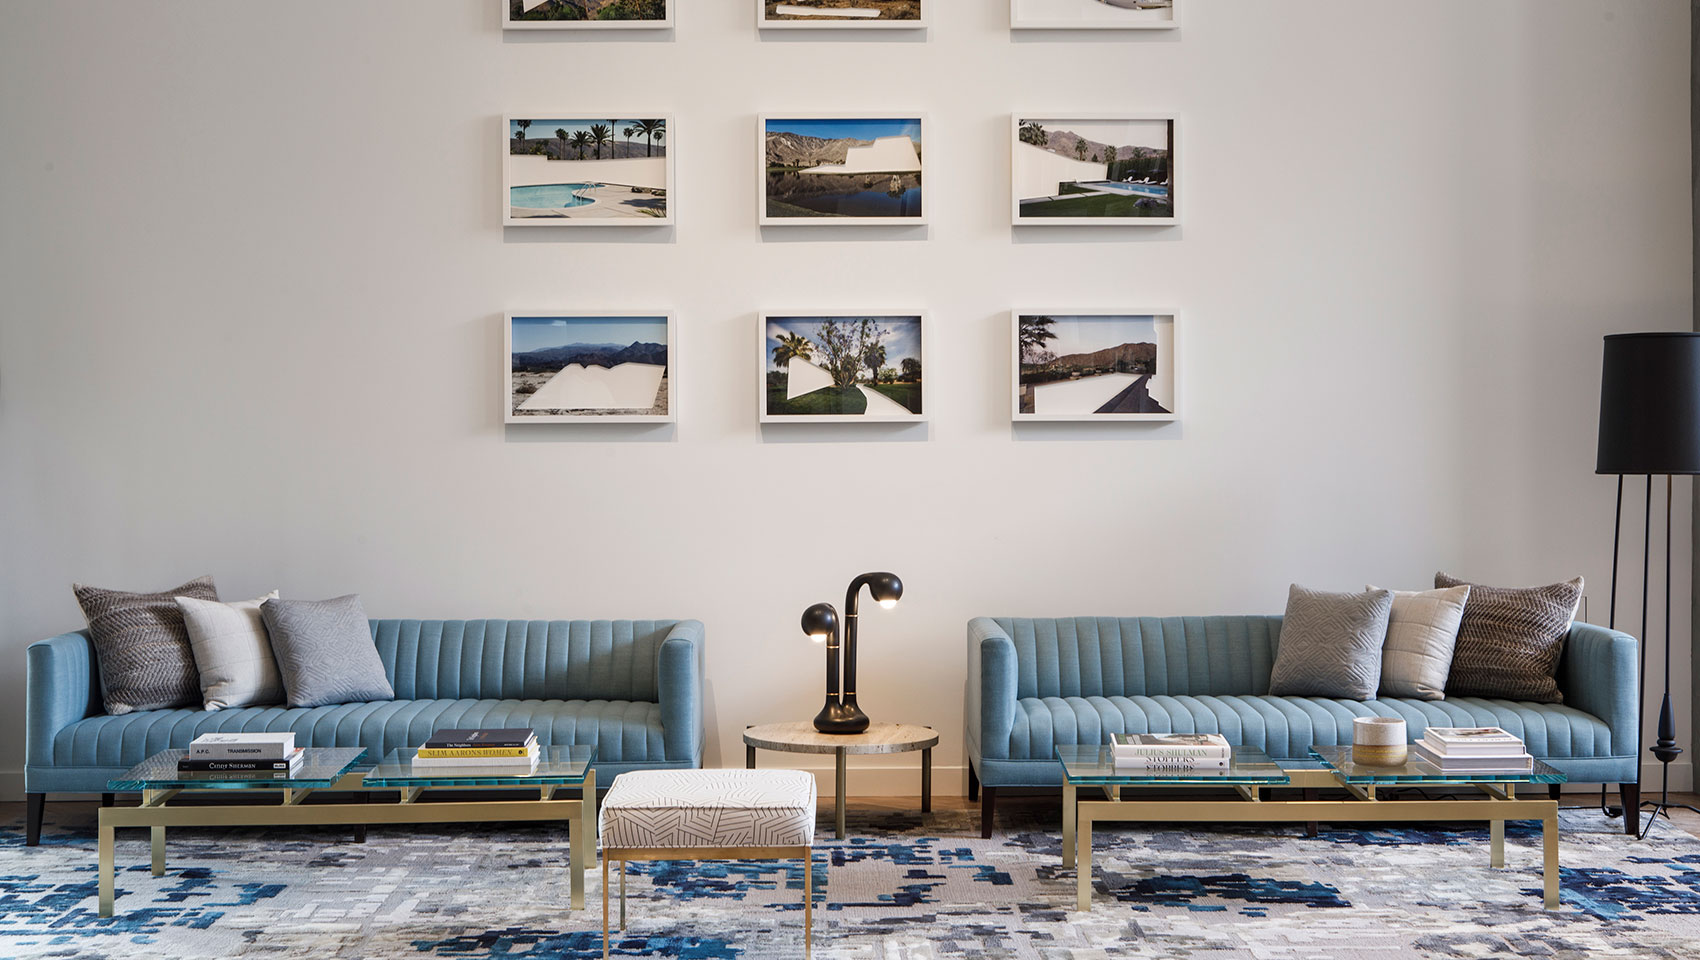 Rowan Lobby with blue couches, glass coffee tables, and framed photos on the wall